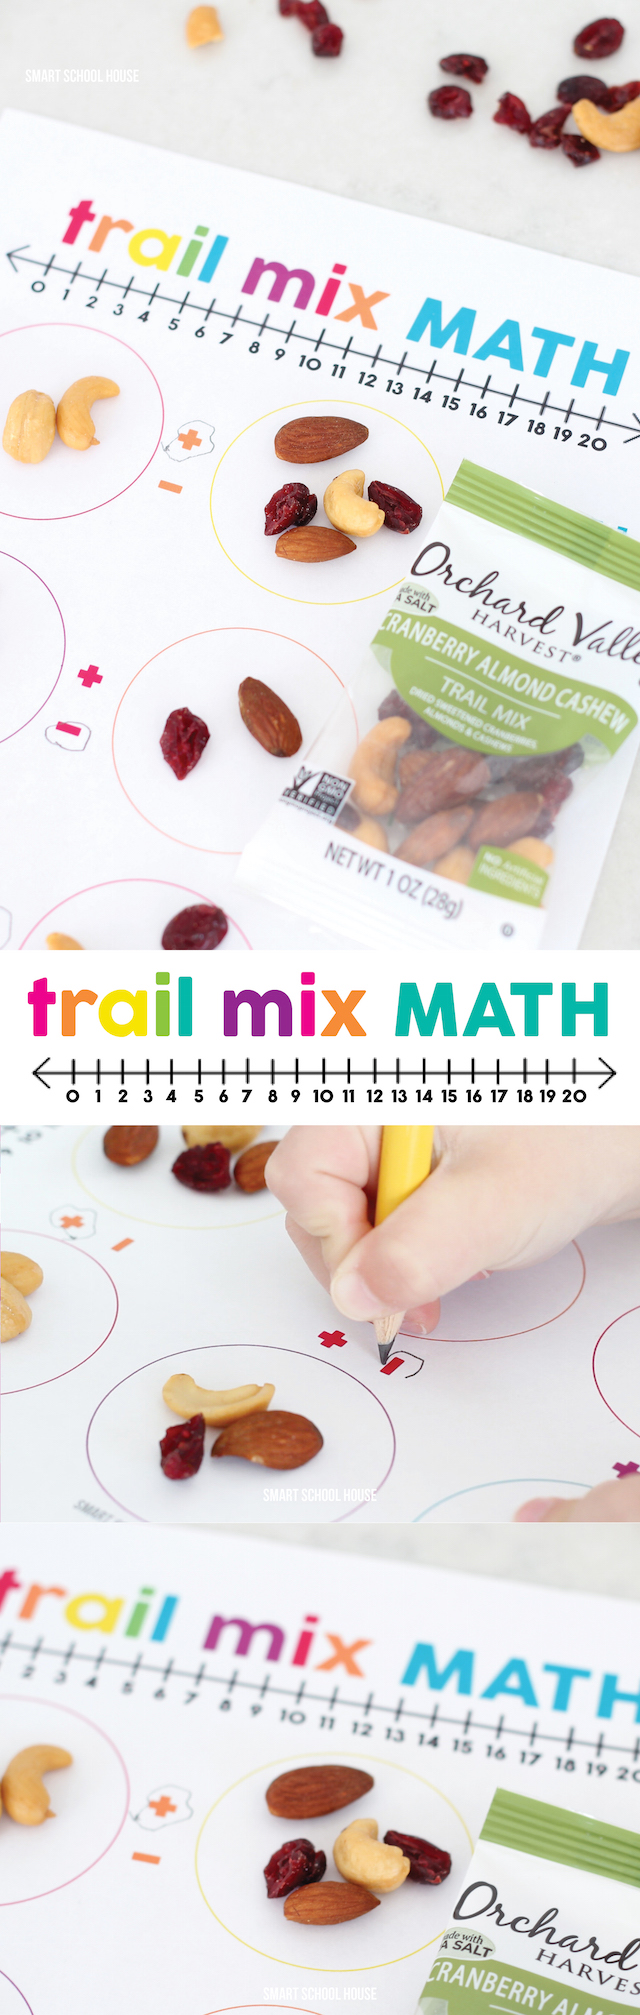 Trail Mix Math - turn trail mix into fun math activities or use this idea at school with the free math worksheet